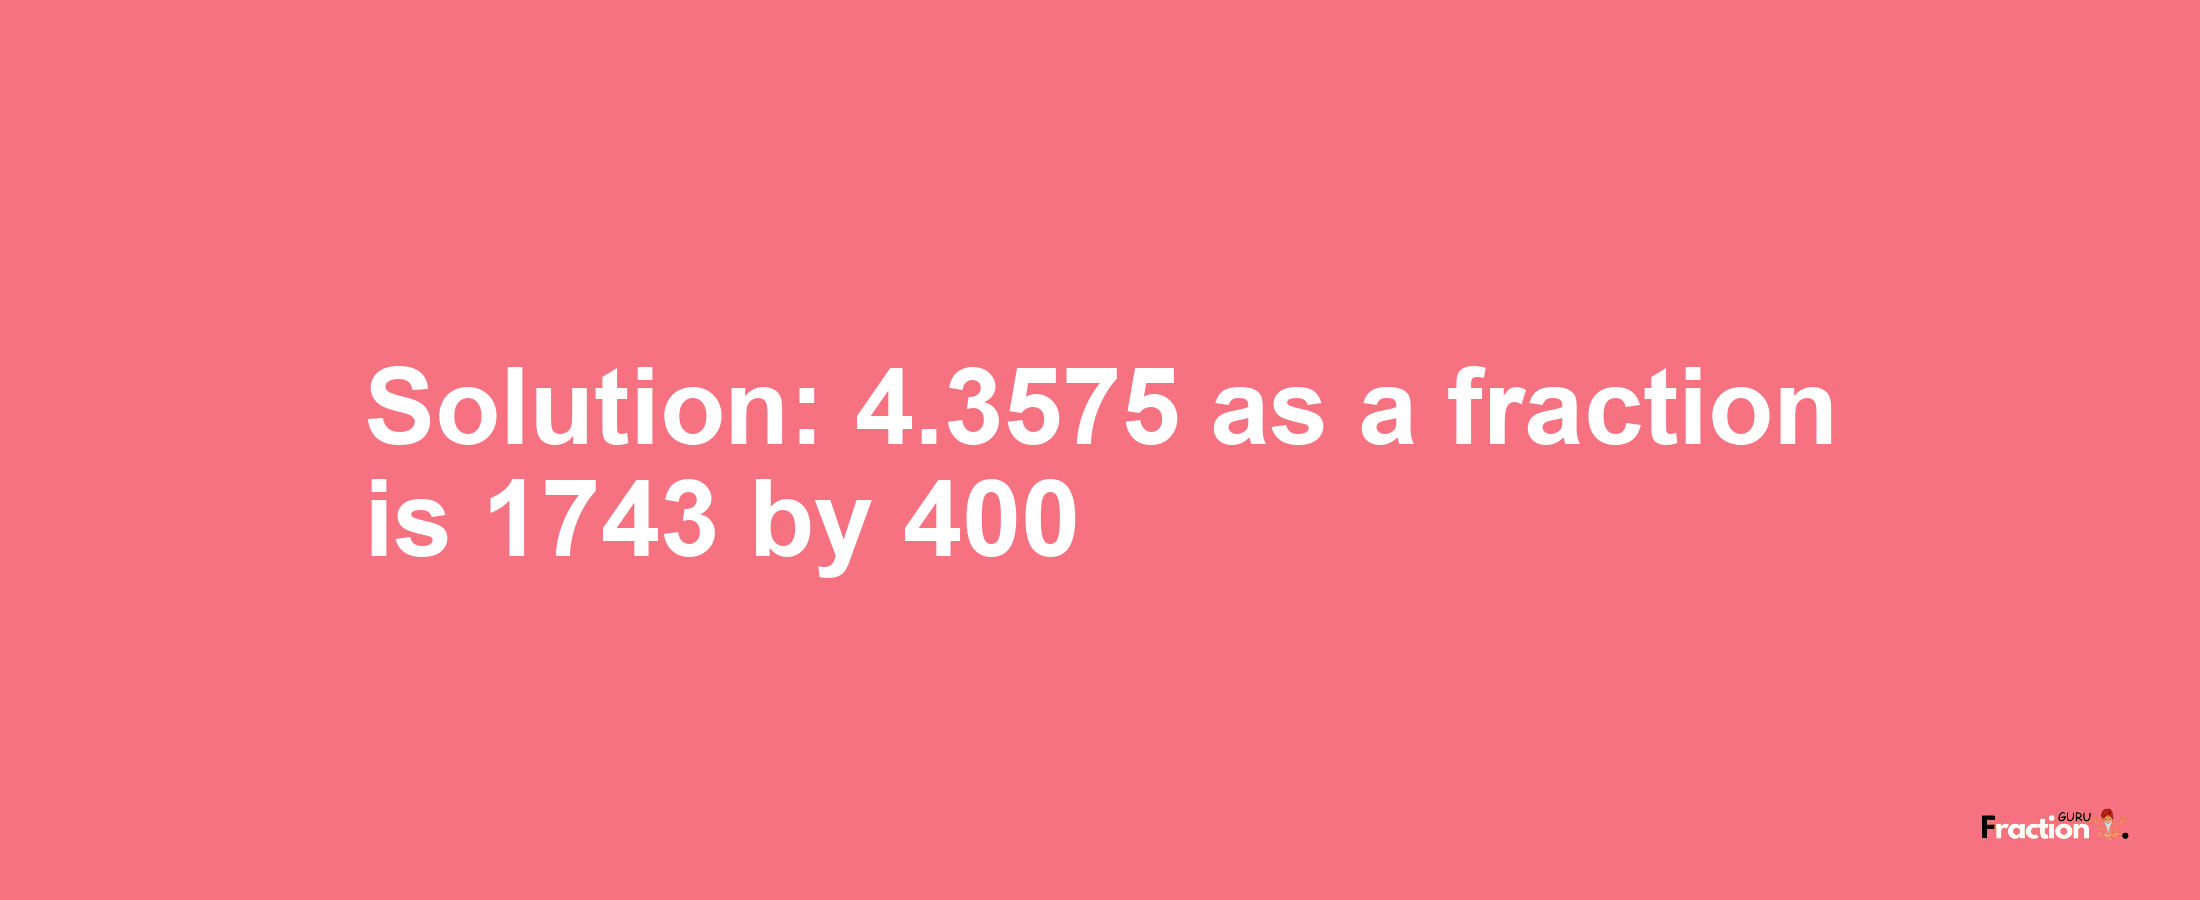 Solution:4.3575 as a fraction is 1743/400